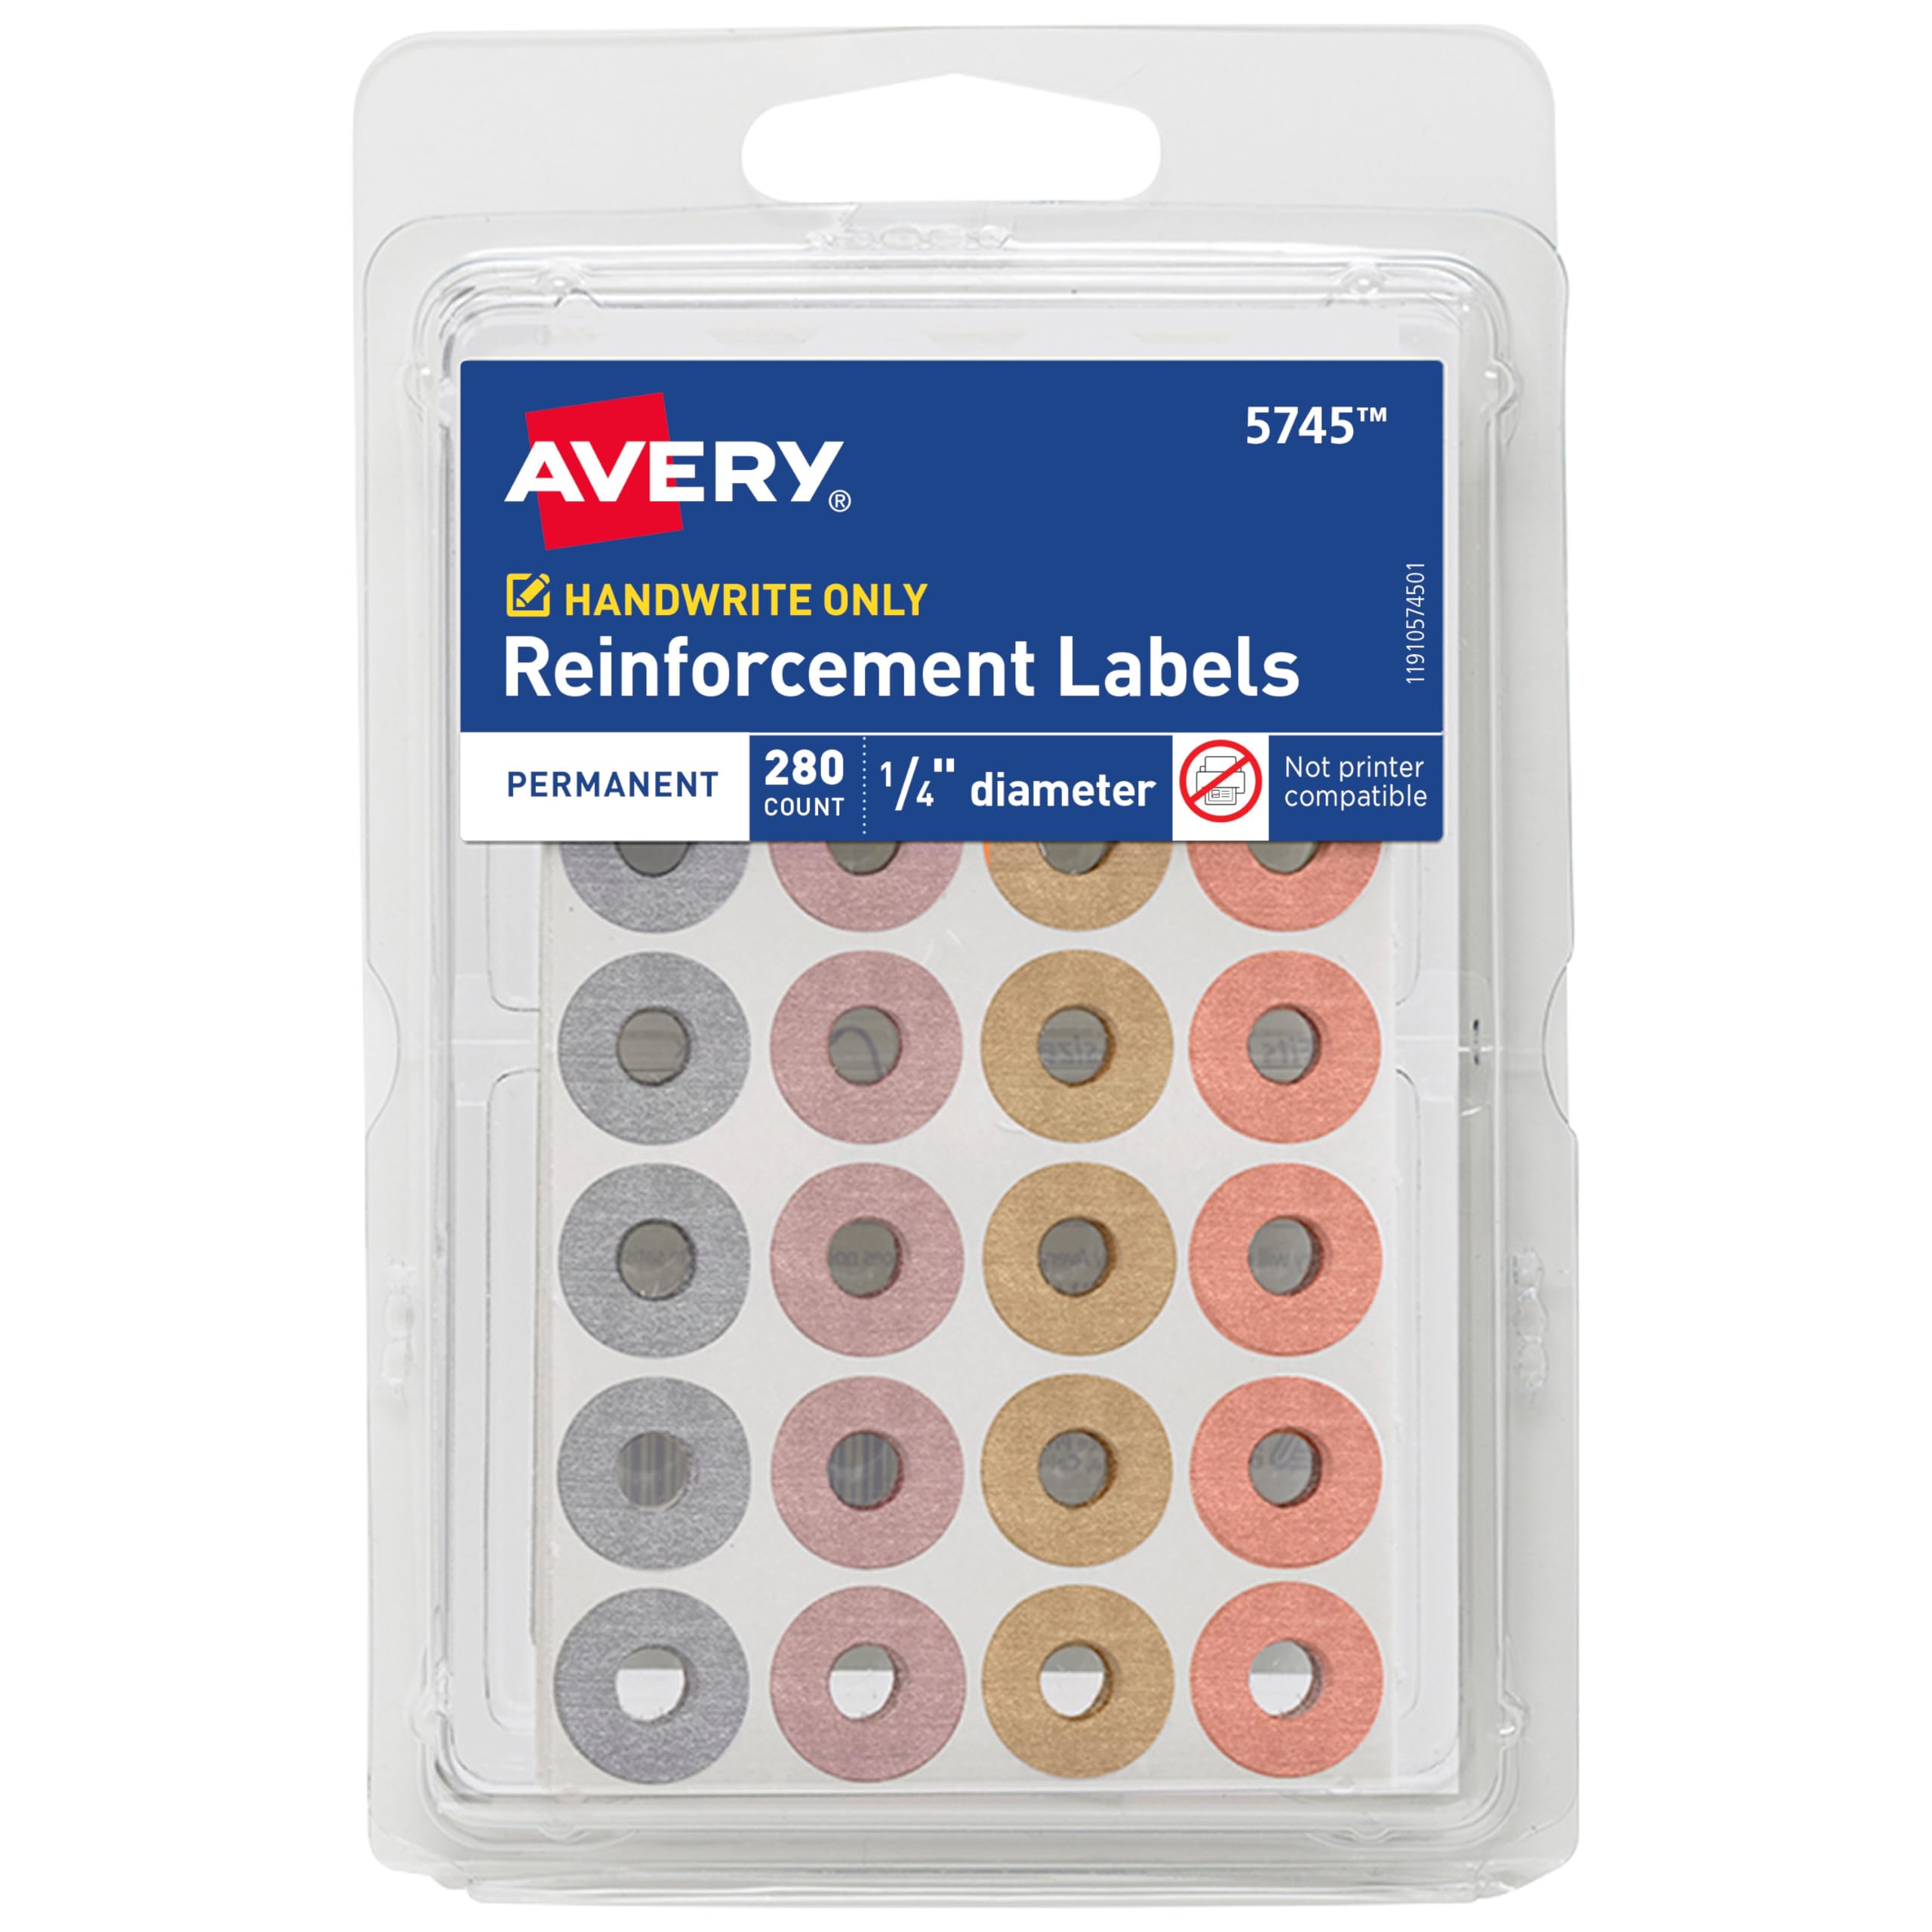 280-Count Avery Self-Adhesive Hole Reinforcement Labels (1/4" Diameter, 5745) $1.18 + Free Shipping w/ Prime or on $35+